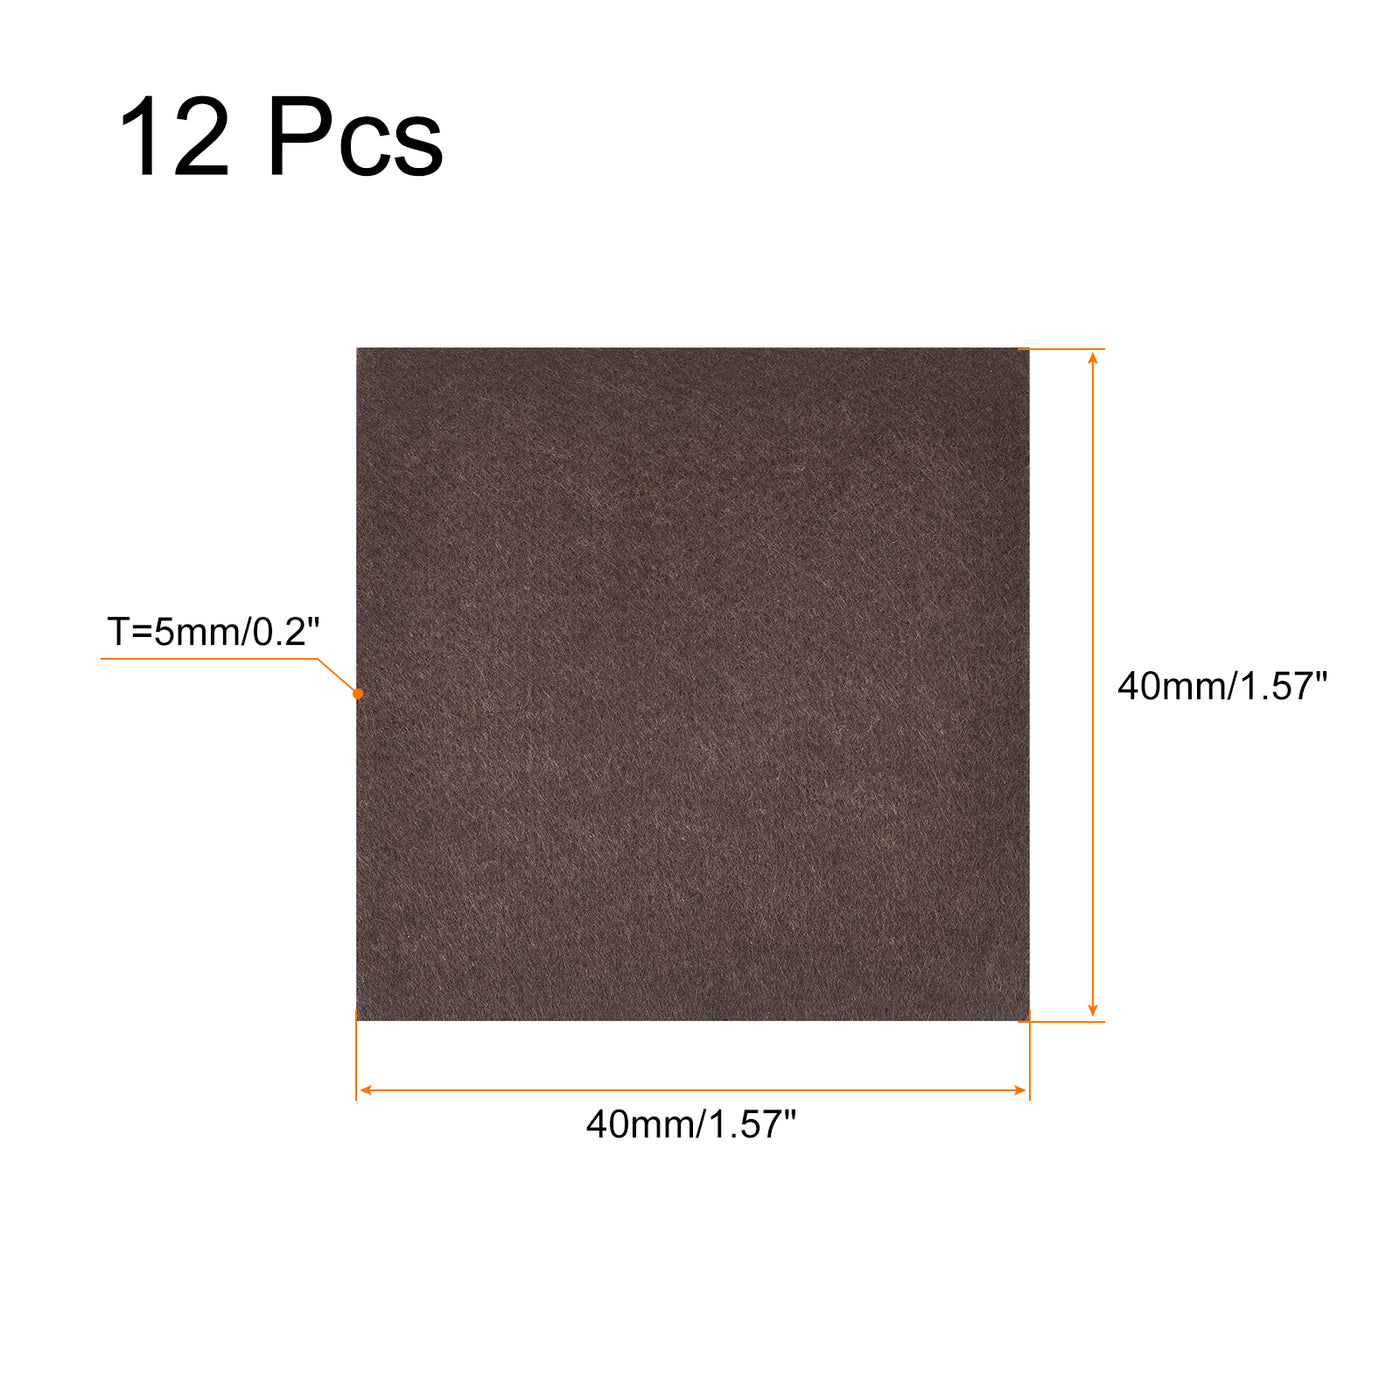 uxcell Uxcell Felt Furniture Pads, 40mm x 40mm Self Adhesive Square Floor Protectors for Furniture Legs Hardwood Floor, Brown 12Pcs